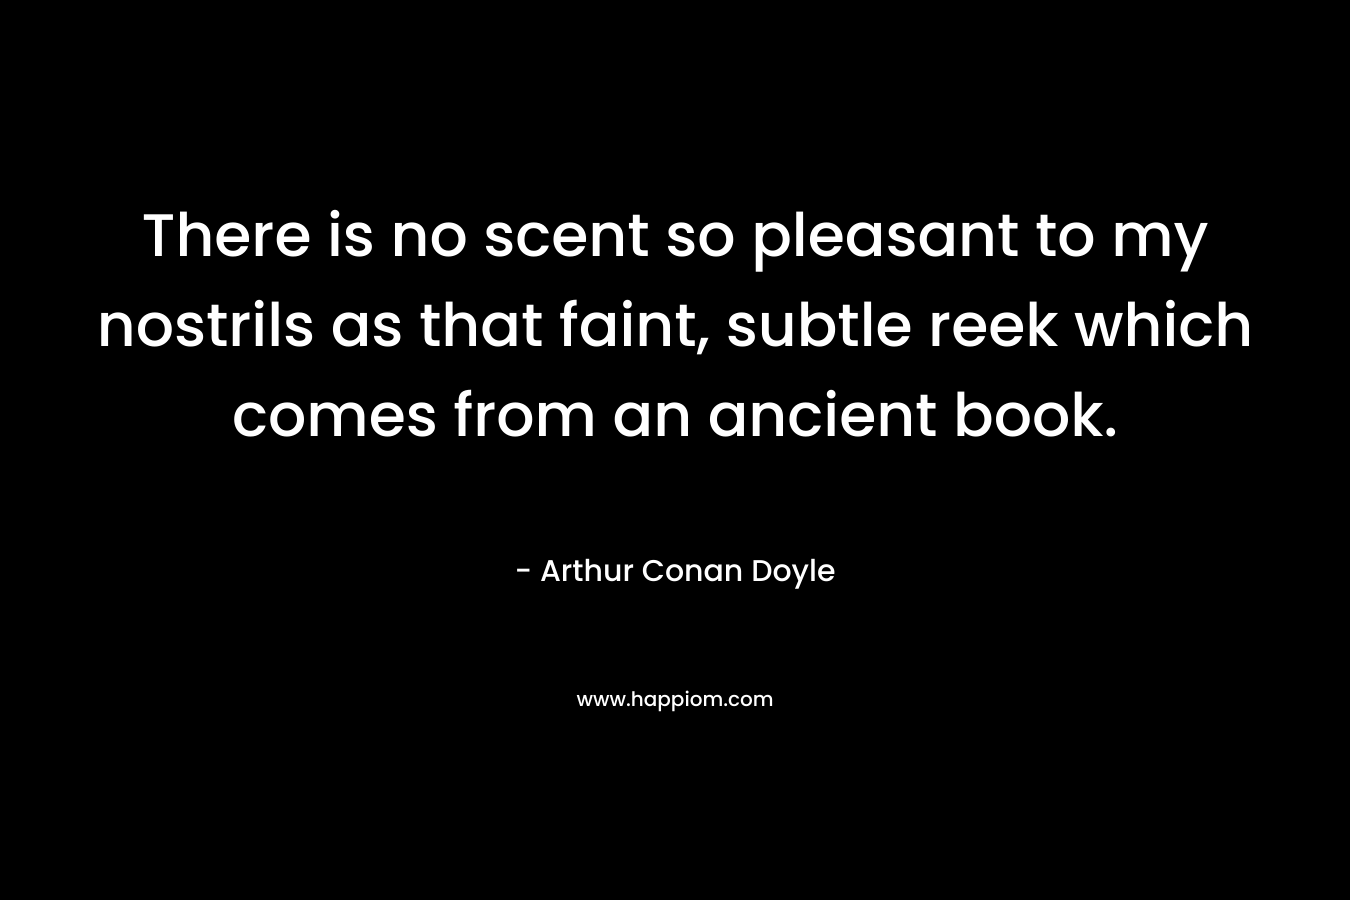 There is no scent so pleasant to my nostrils as that faint, subtle reek which comes from an ancient book. – Arthur Conan Doyle